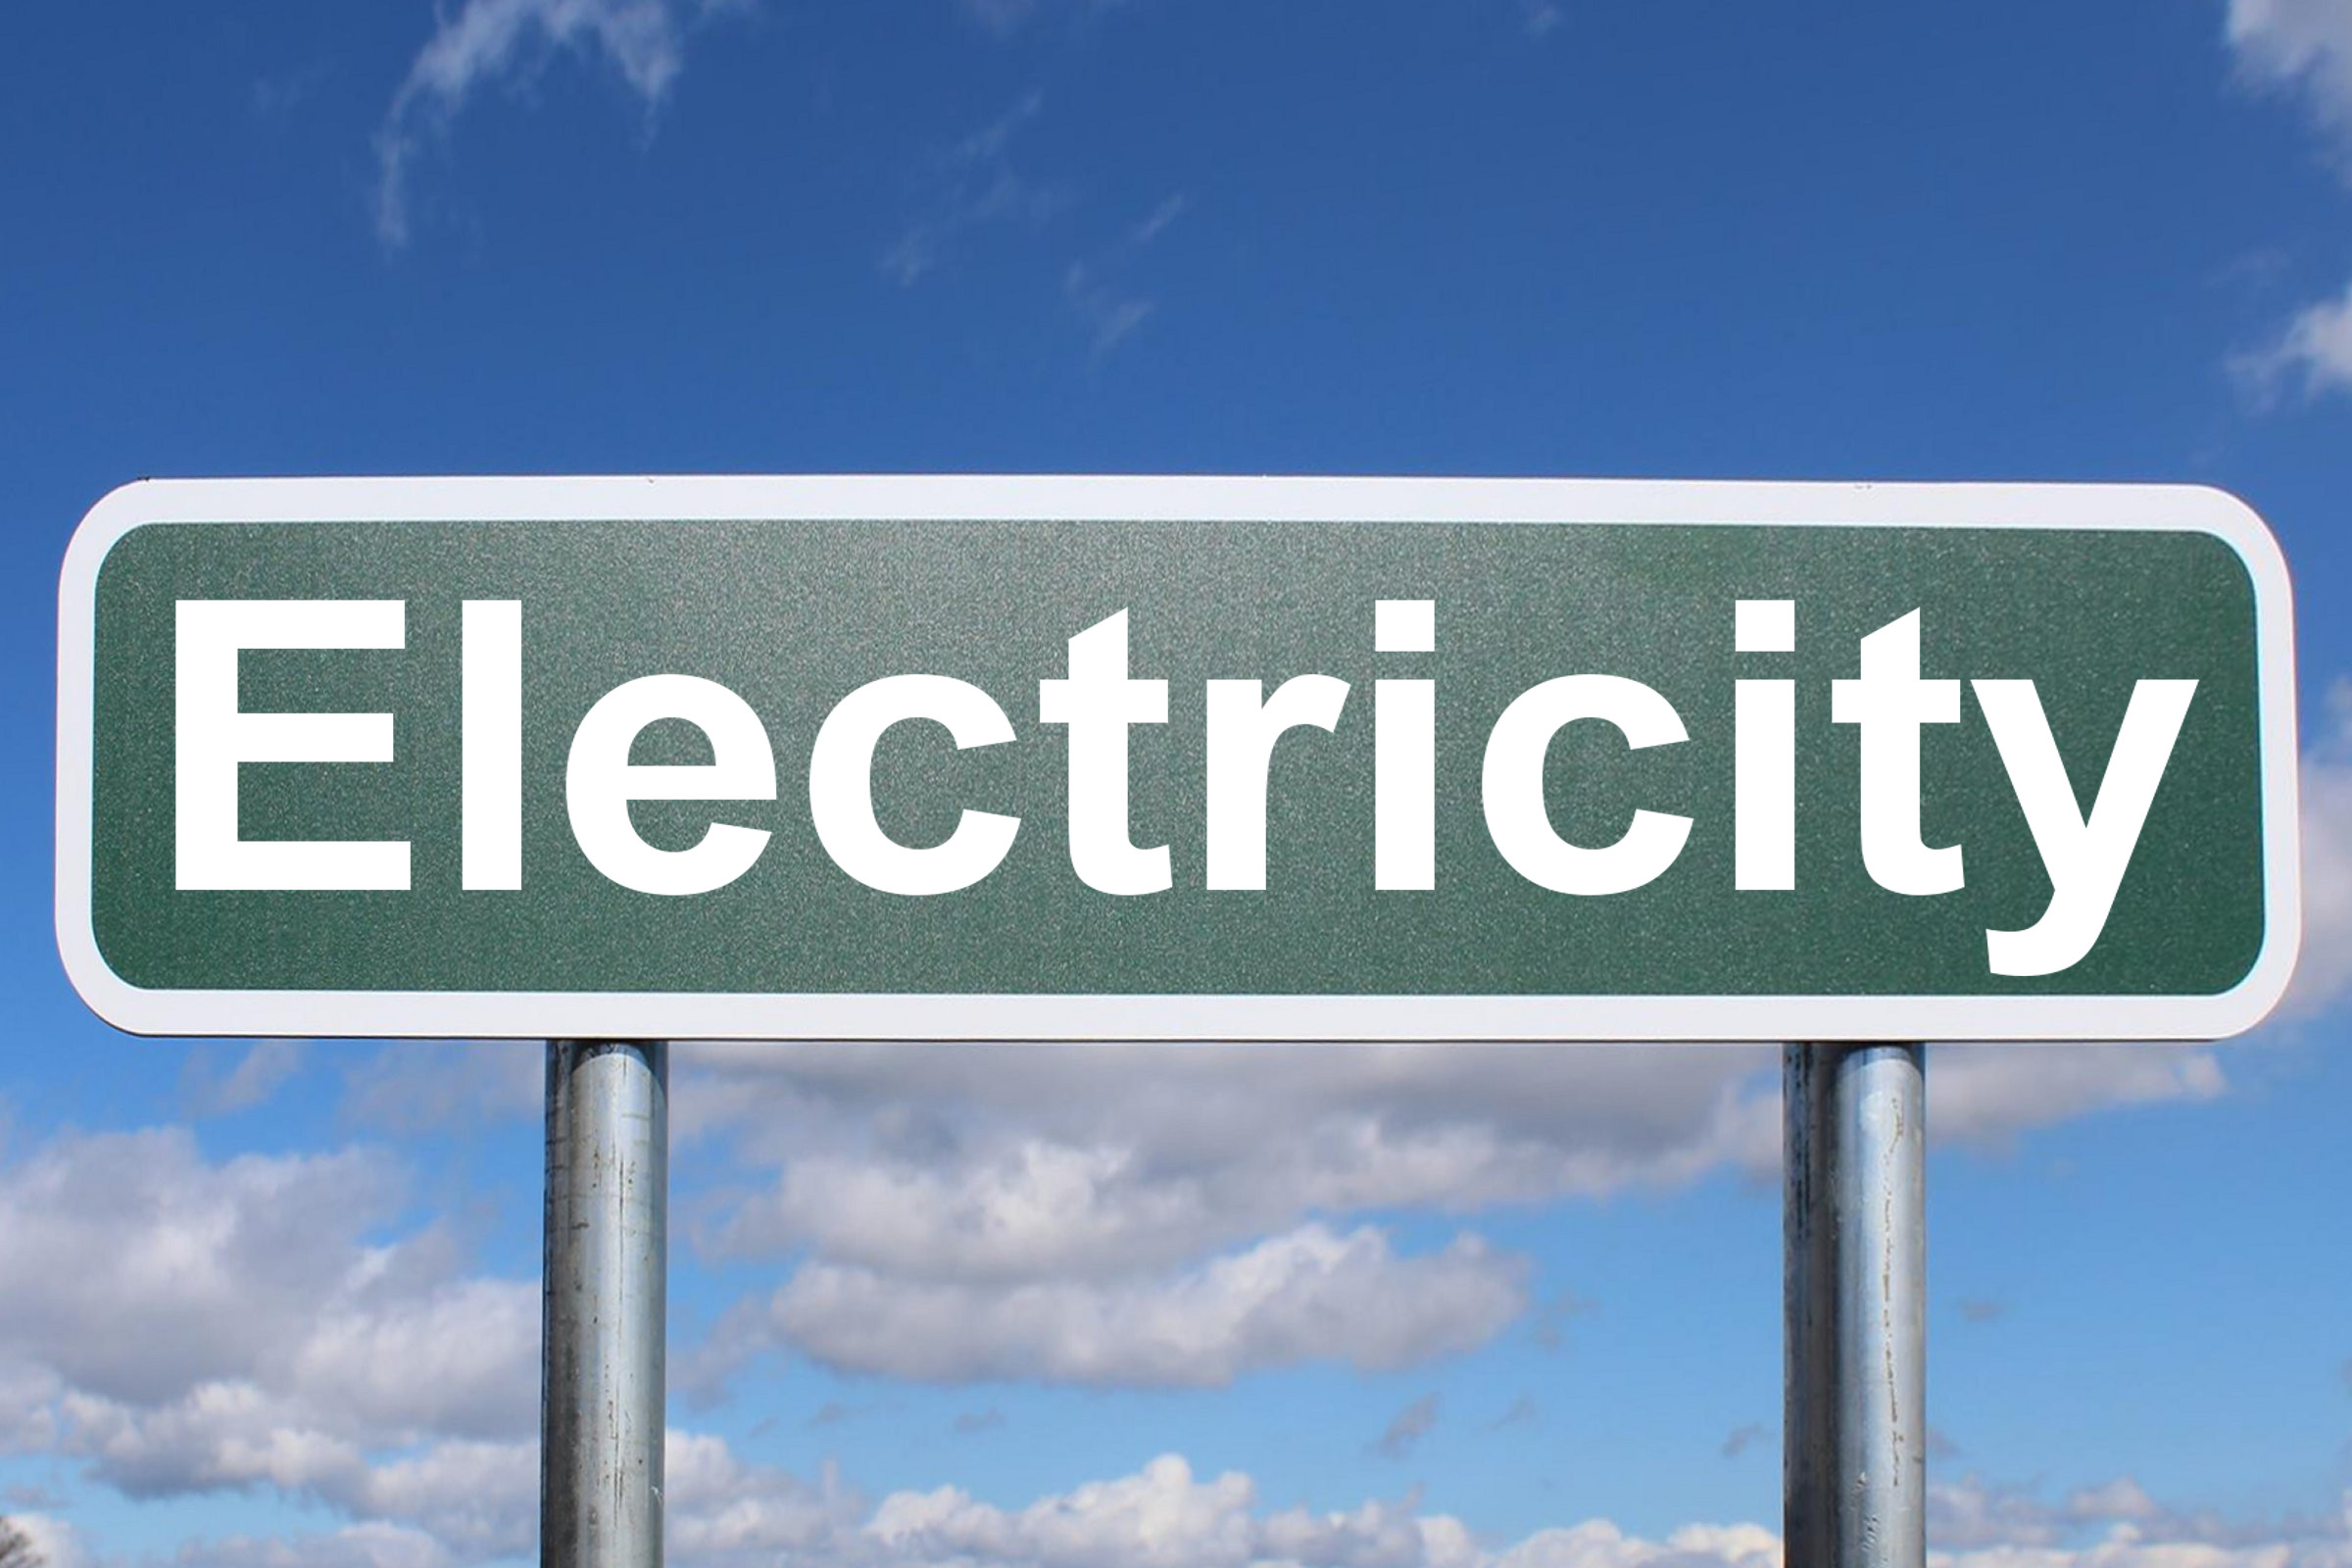 Free Of Charge Creative Commons Electricity Image Highway Signs 3